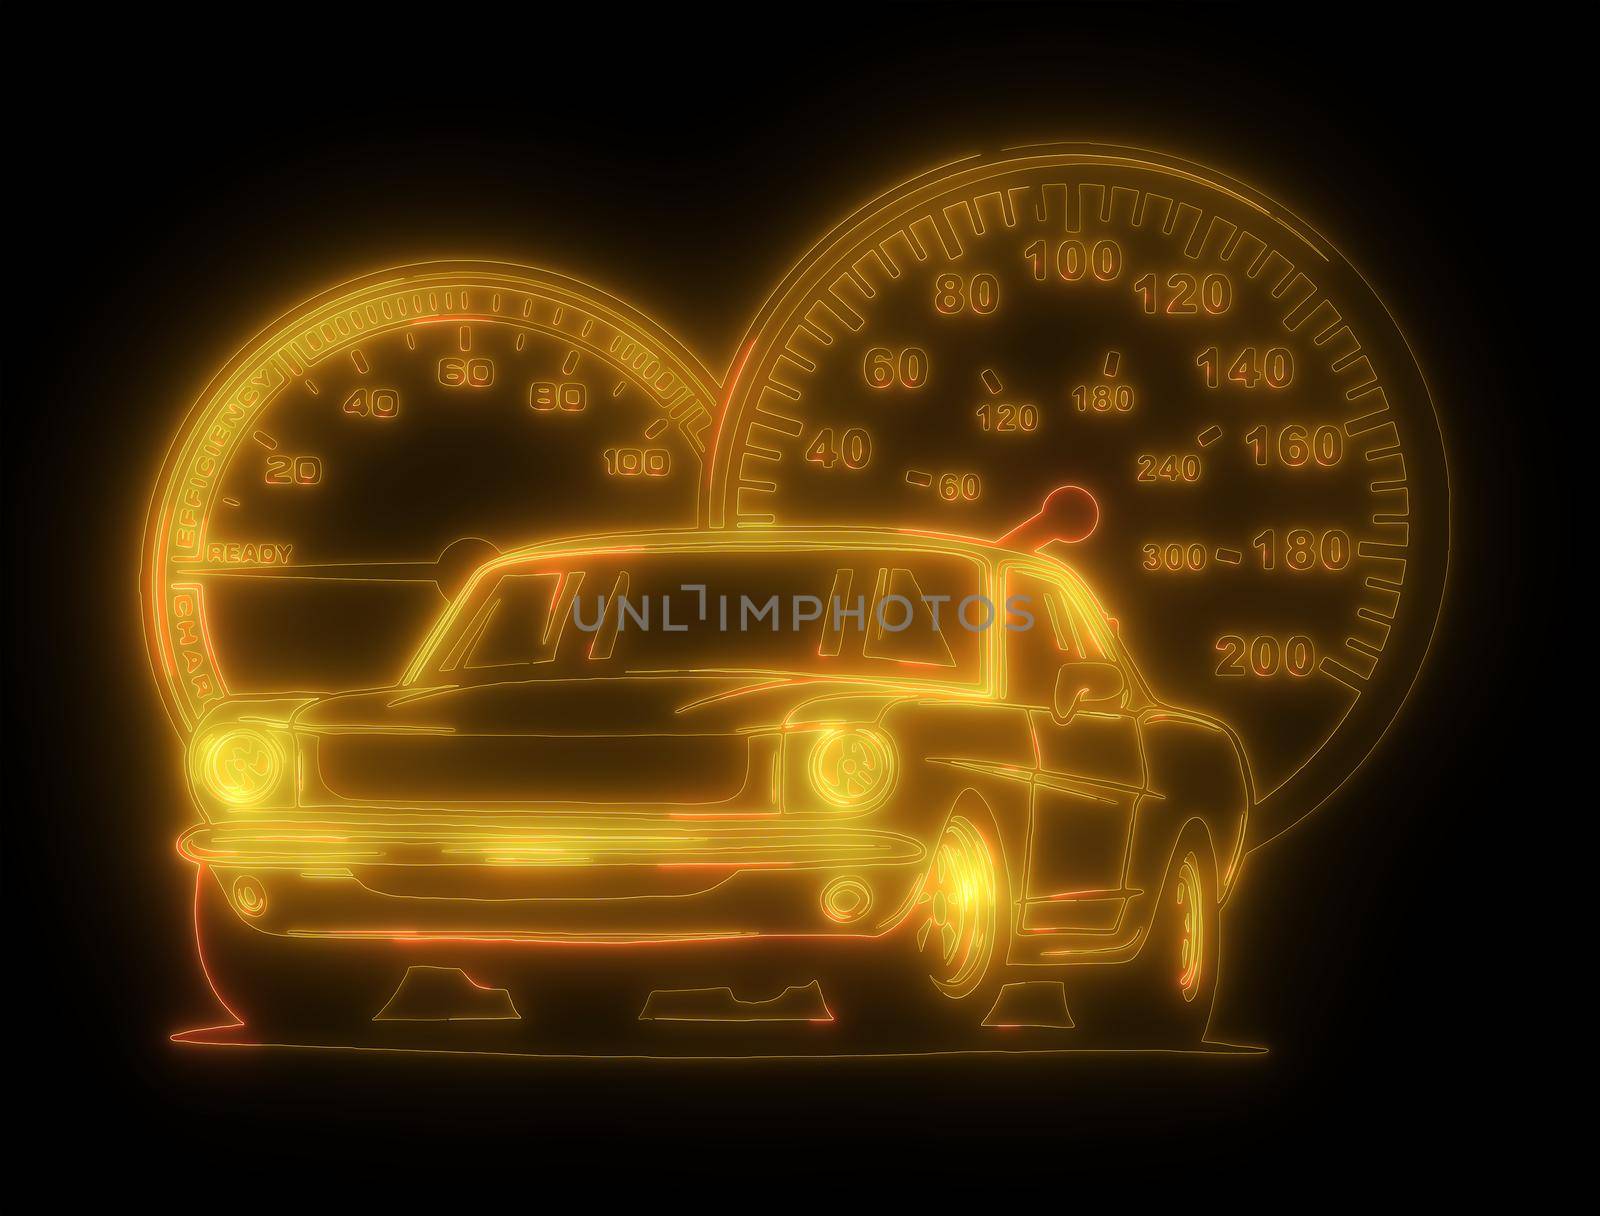 Neon silhouette of classic American muscle car. Glowing sign. illustration.